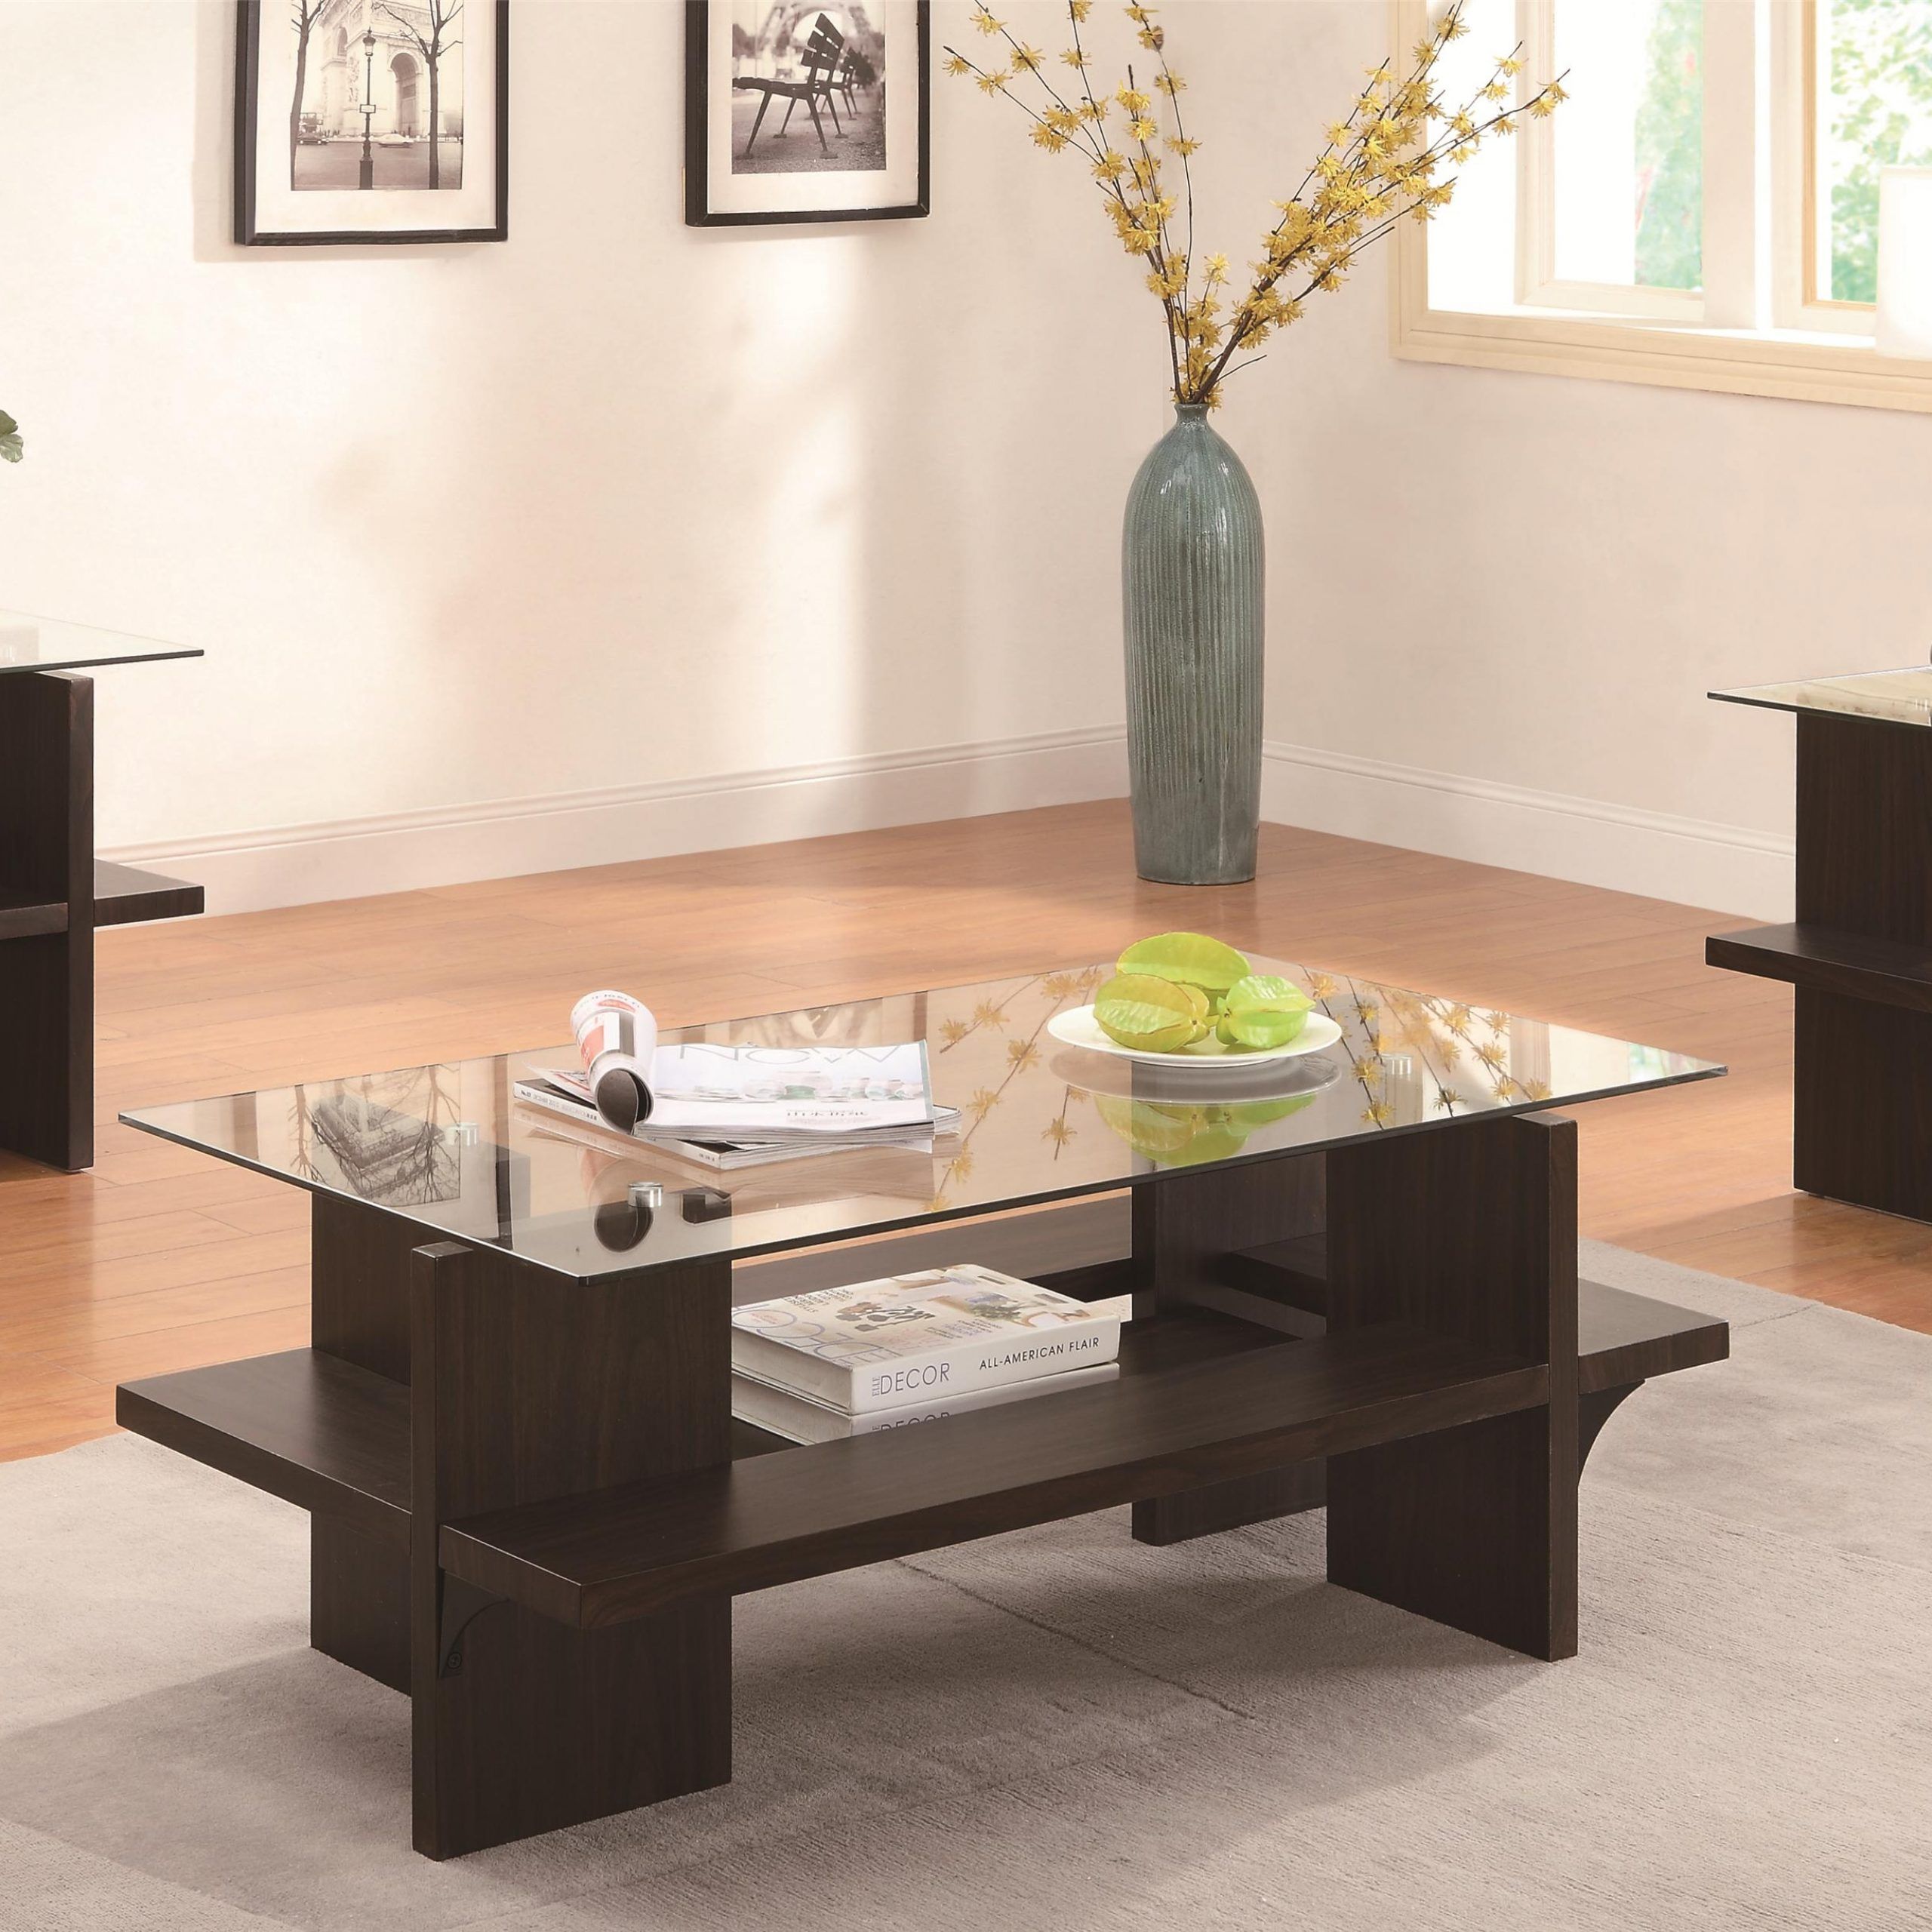 3 Piece Occasional Table Sets 3 Piece Contemporary Occasional Table Set  With Glass Tops And Storage Shelves | Quality Furniture At Affordable  Prices In Philadelphia Main Line Pa Intended For Glass Coffee Tables With Storage Shelf (View 20 of 20)